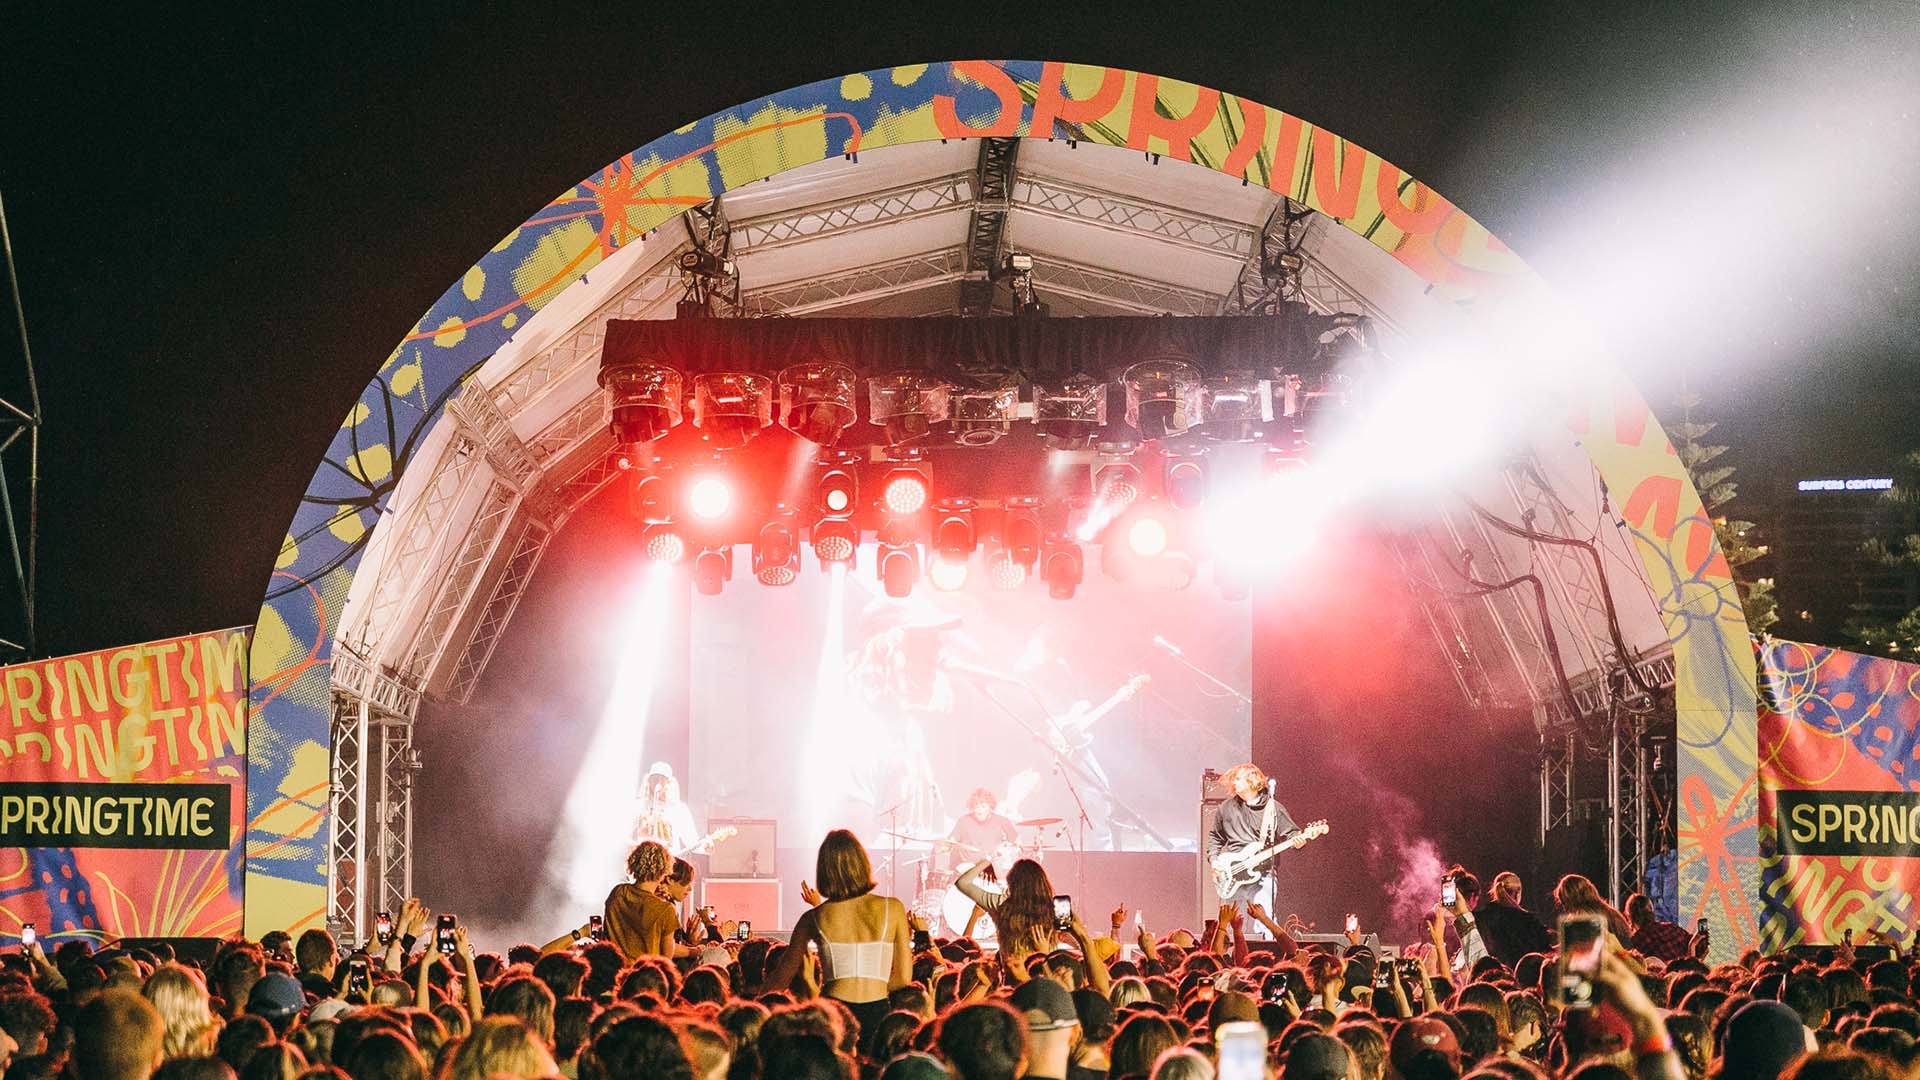 Free Beachside Music Fest SPRINGTIME Is Returning in 2023 with BENEE, Matt Corby and Bag Raiders